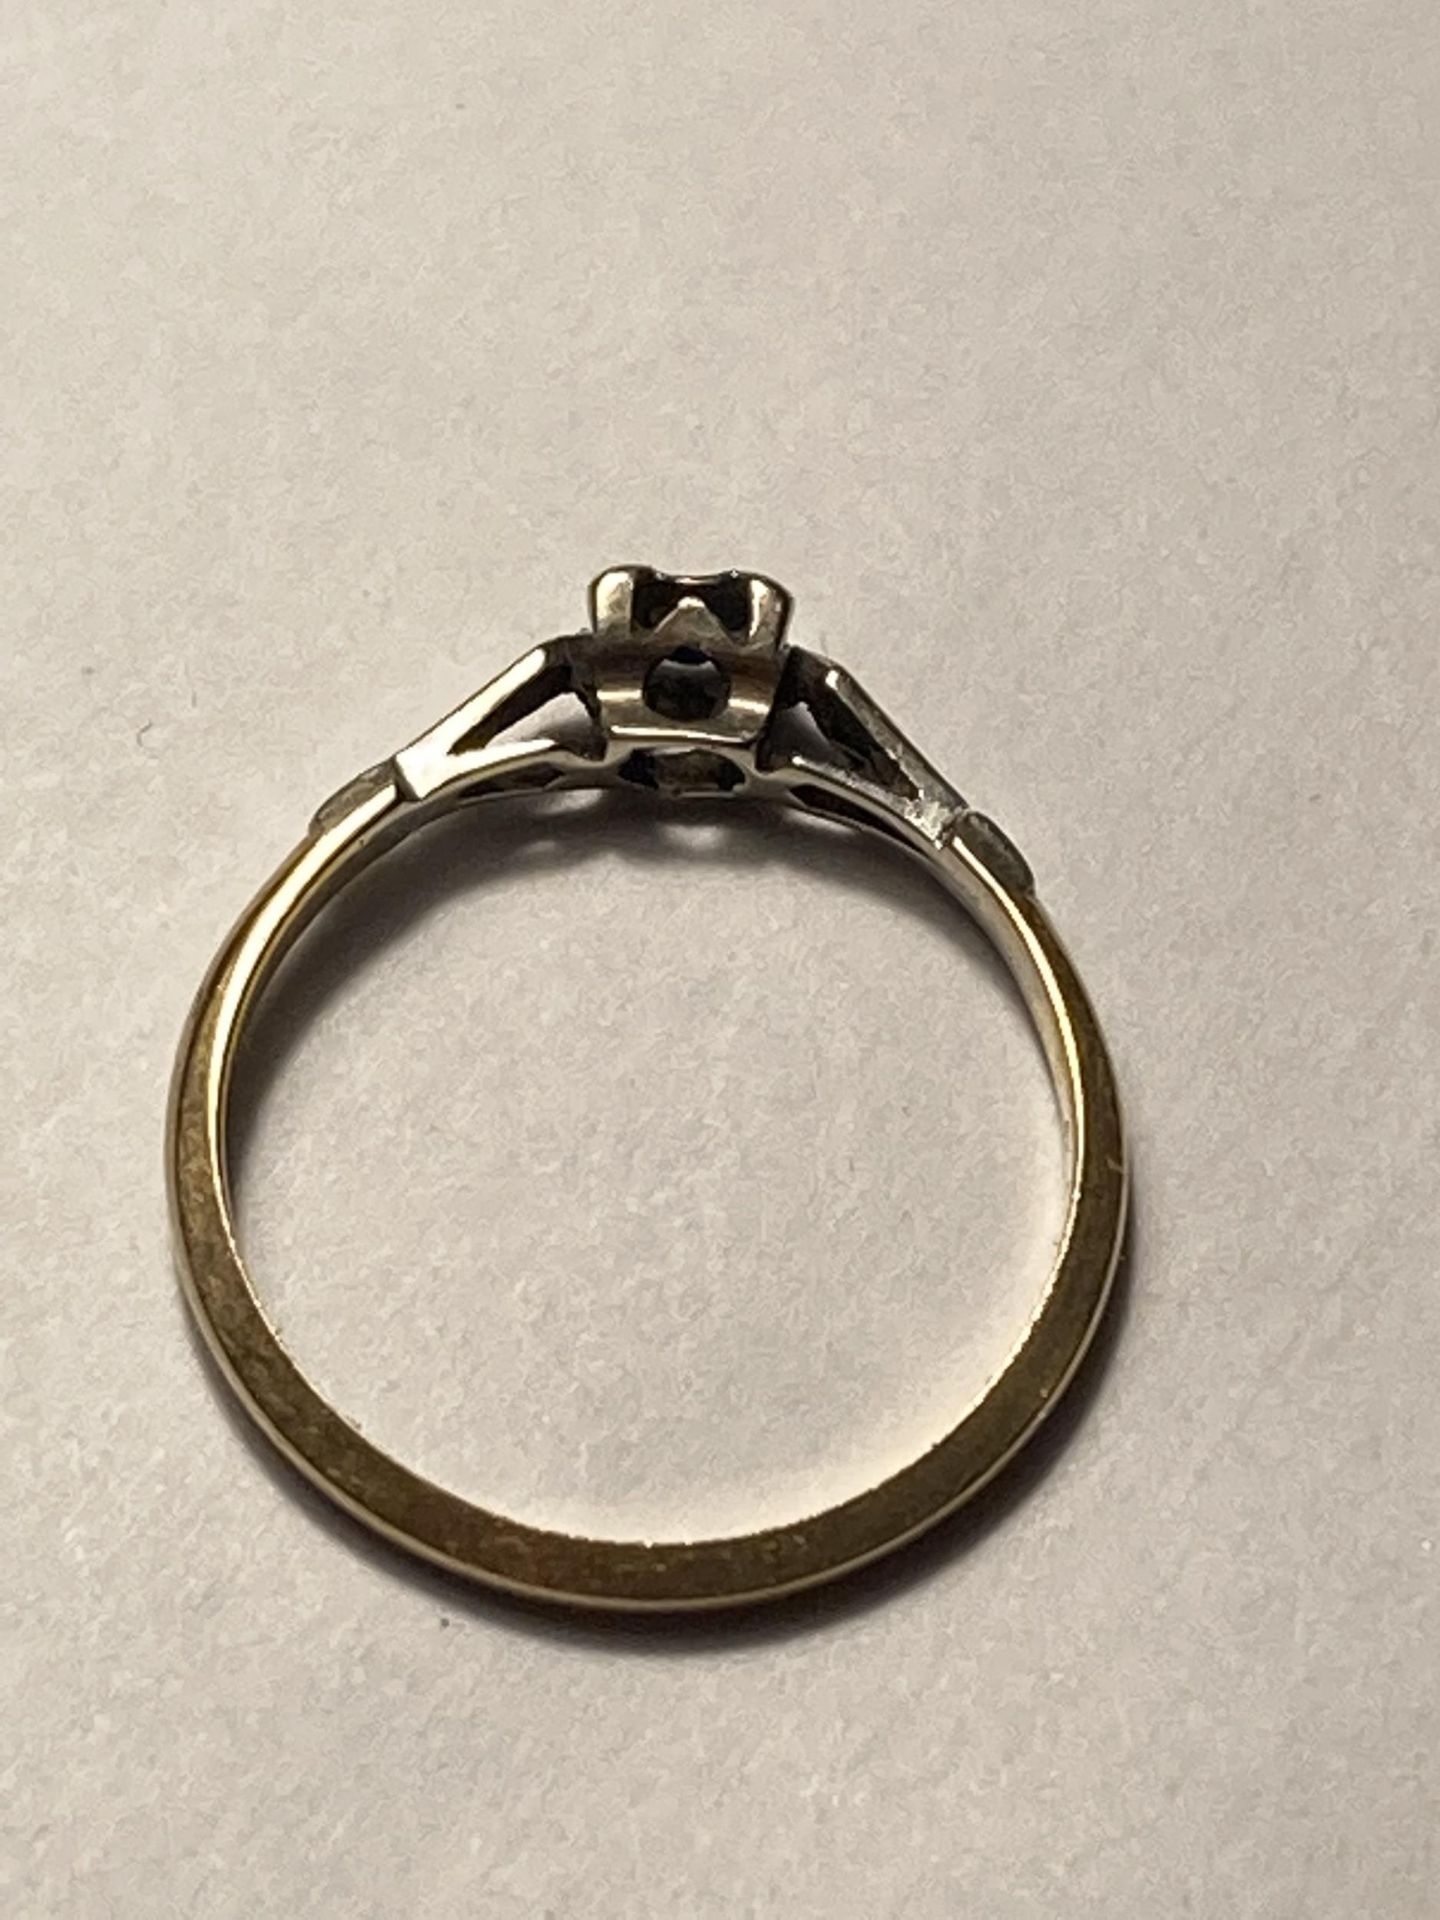 AN 18 CARAT GOLD SOLITAIRE DIAMOND RING K - Image 3 of 3